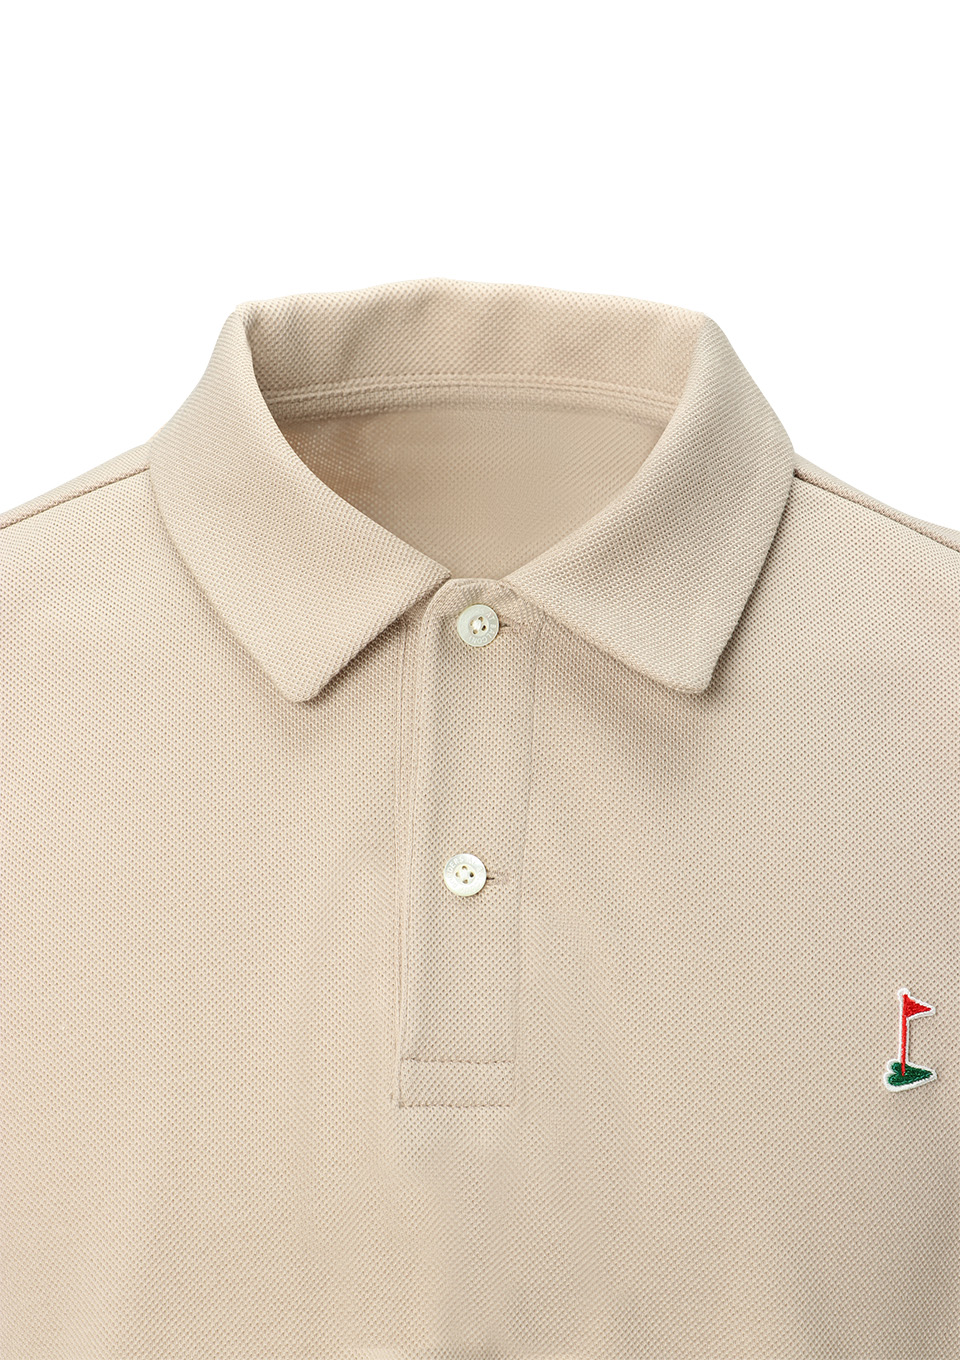 GDT POLO MENS